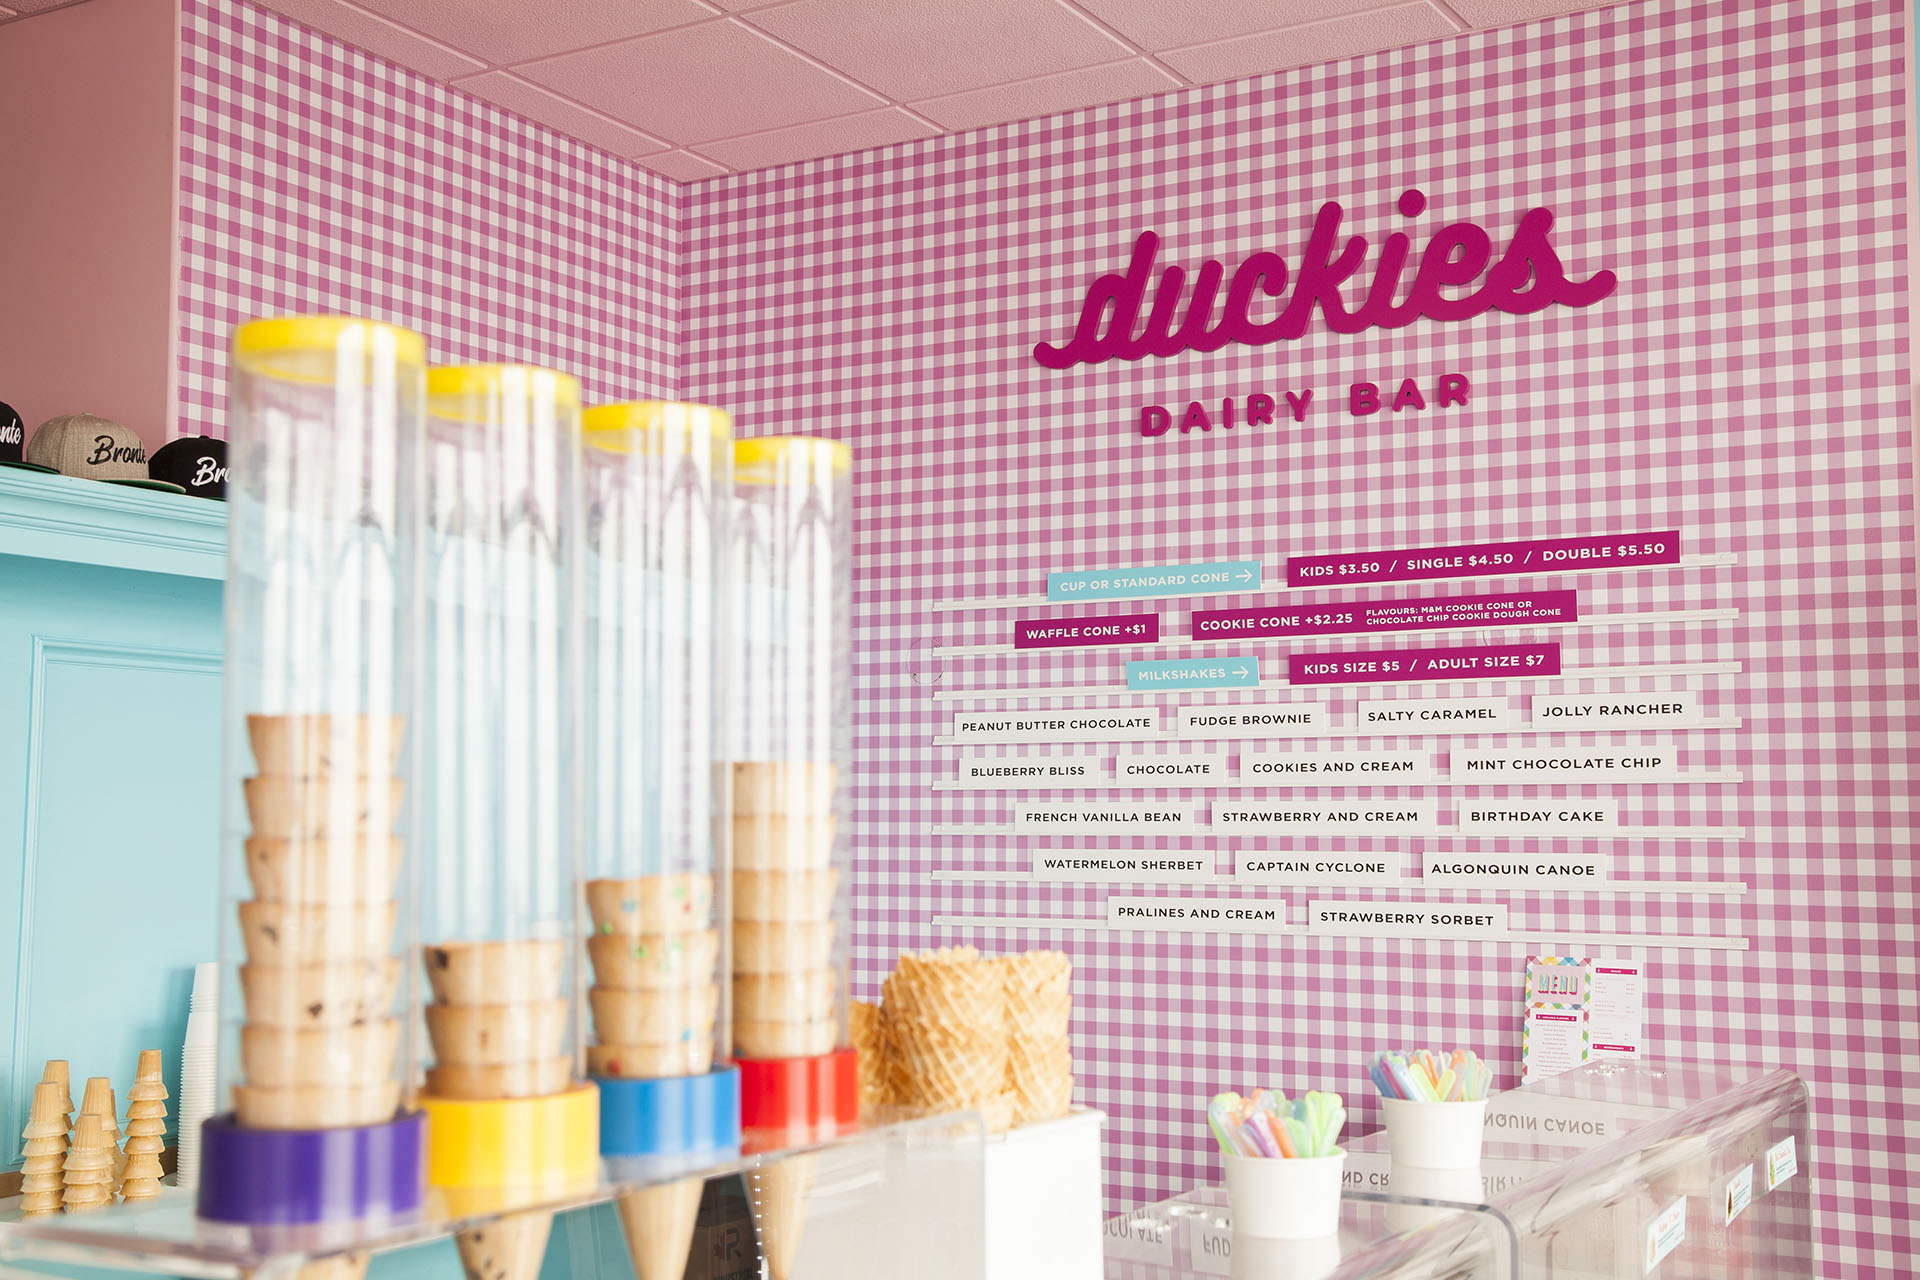 Interior of Duckies Dairy Bar with ice cream cone dispensers on top of the counter